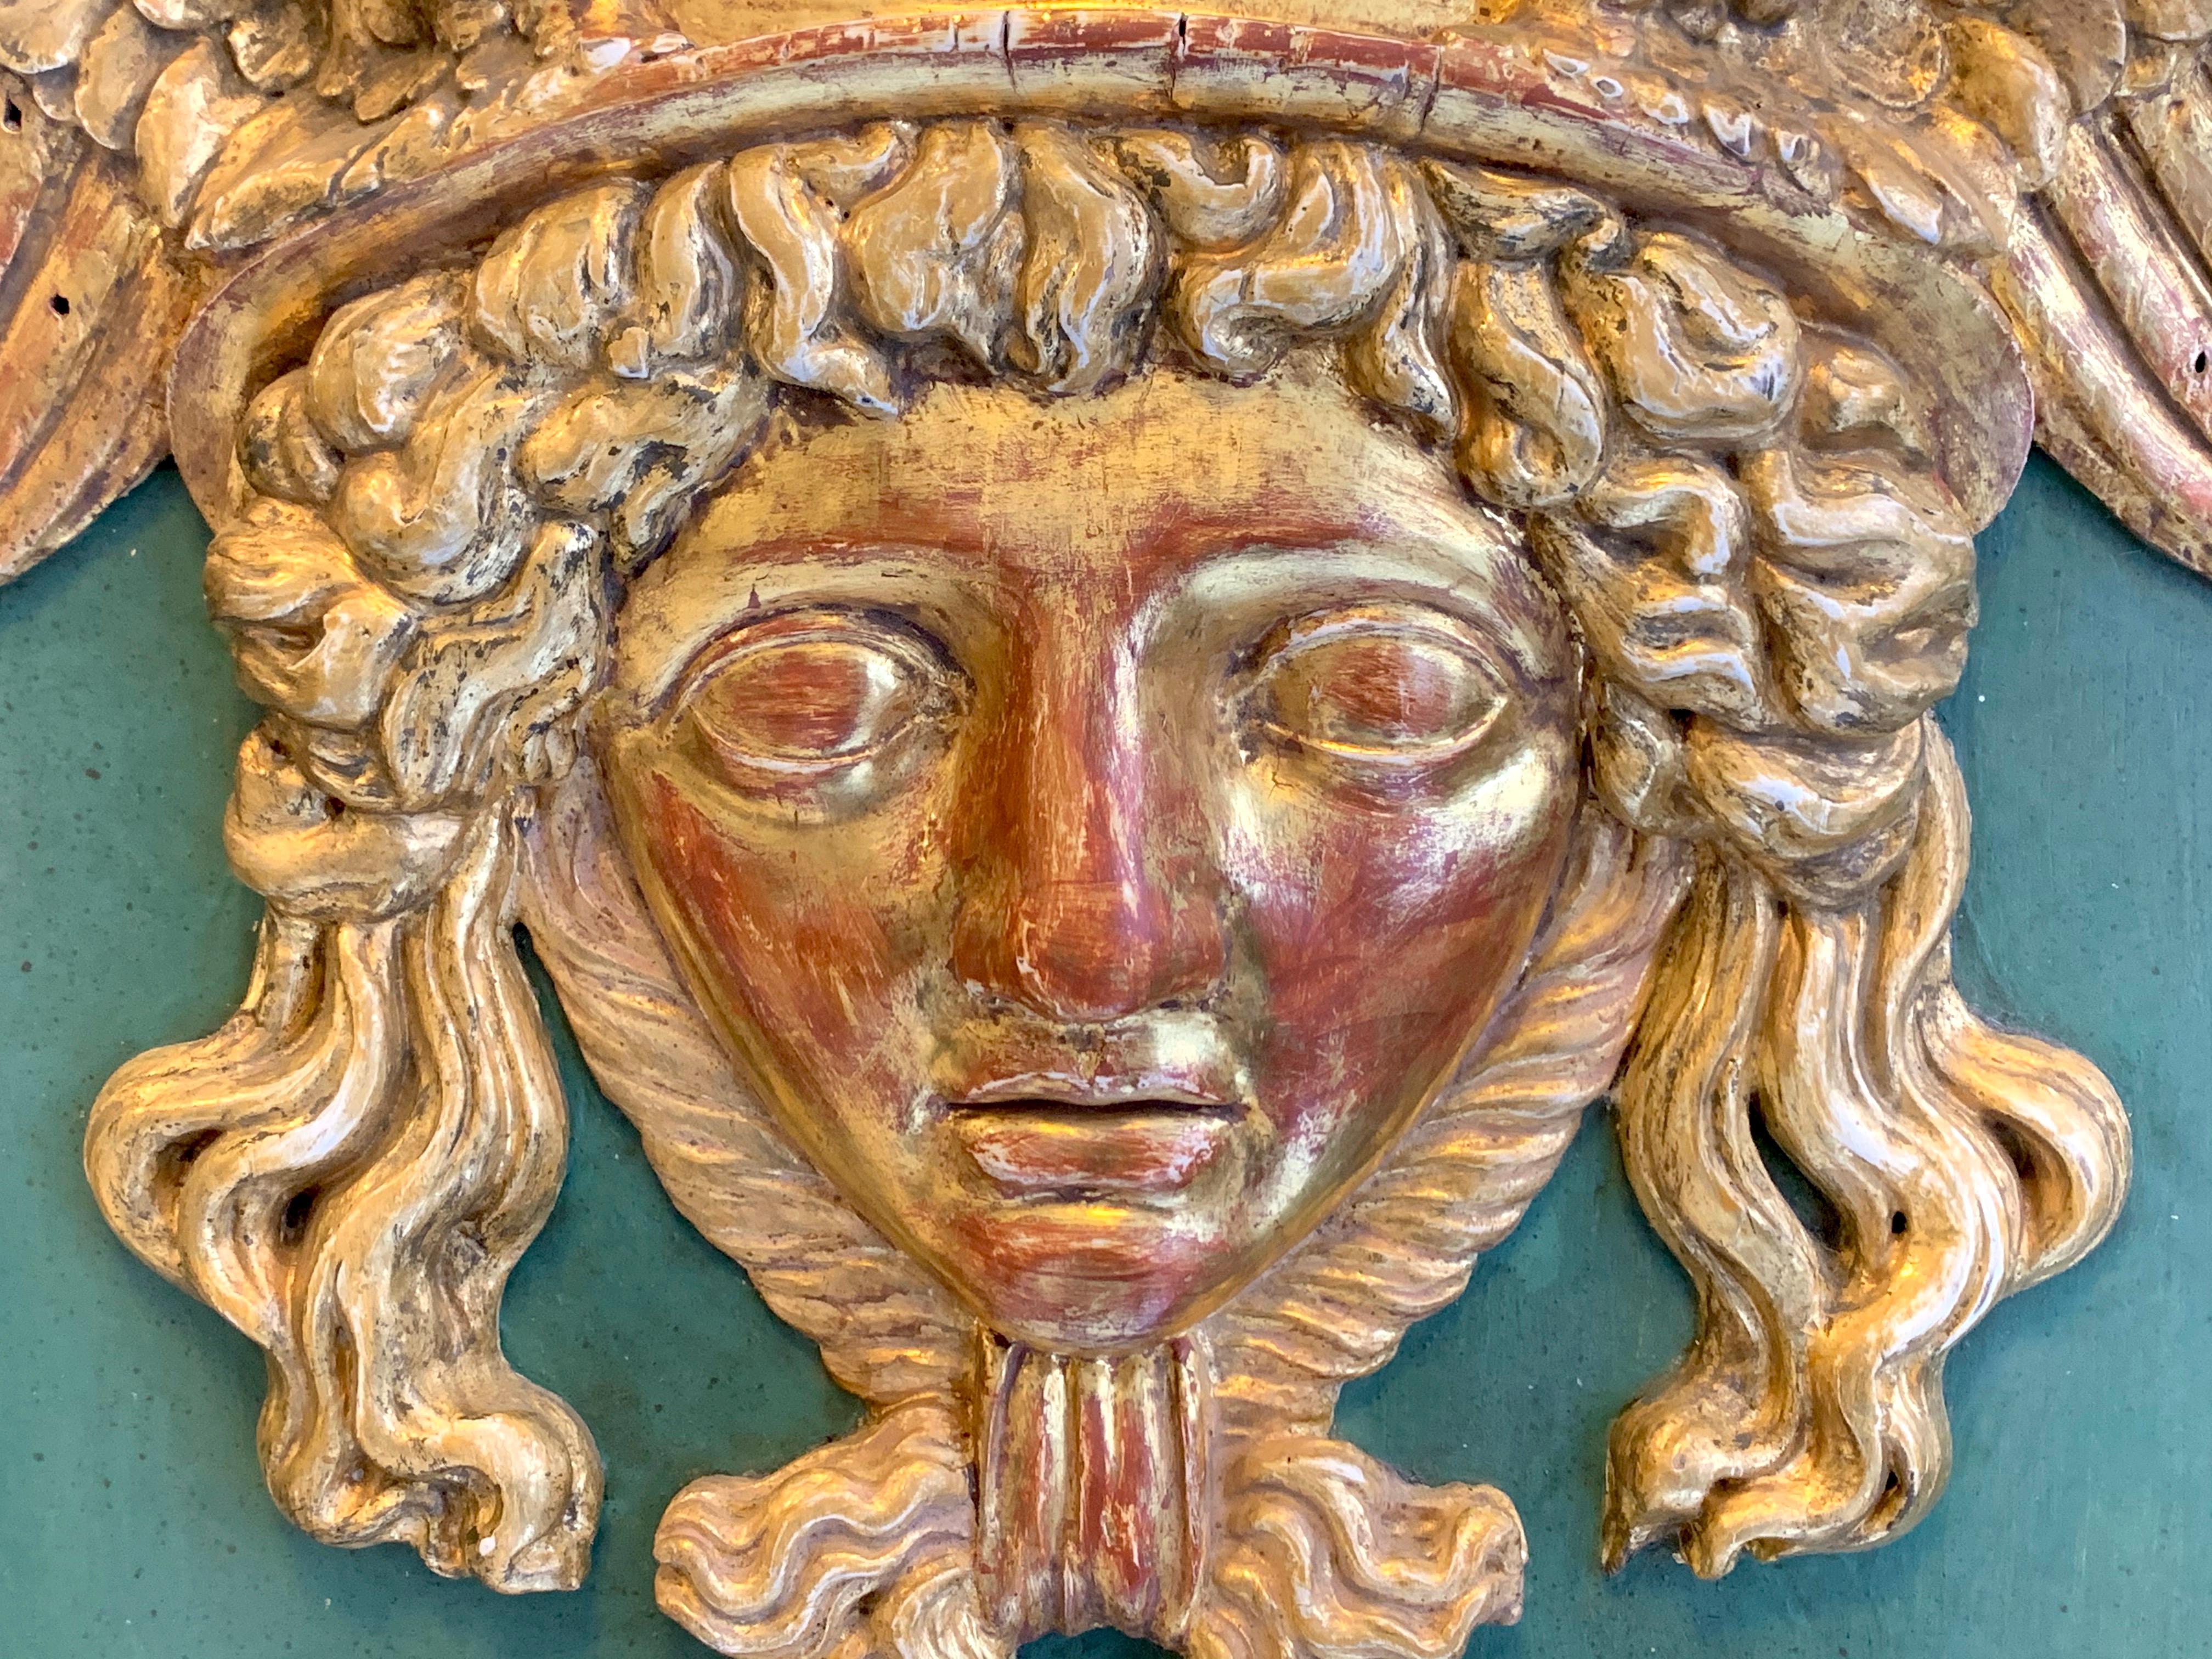 This beautiful head of Hermes wearing his winged helmet is carved out of boxwood and has preserved the original gilding. The head is mounted on a blackened oak board retaining it's original seagrass green paint.
This unusual relief was made in